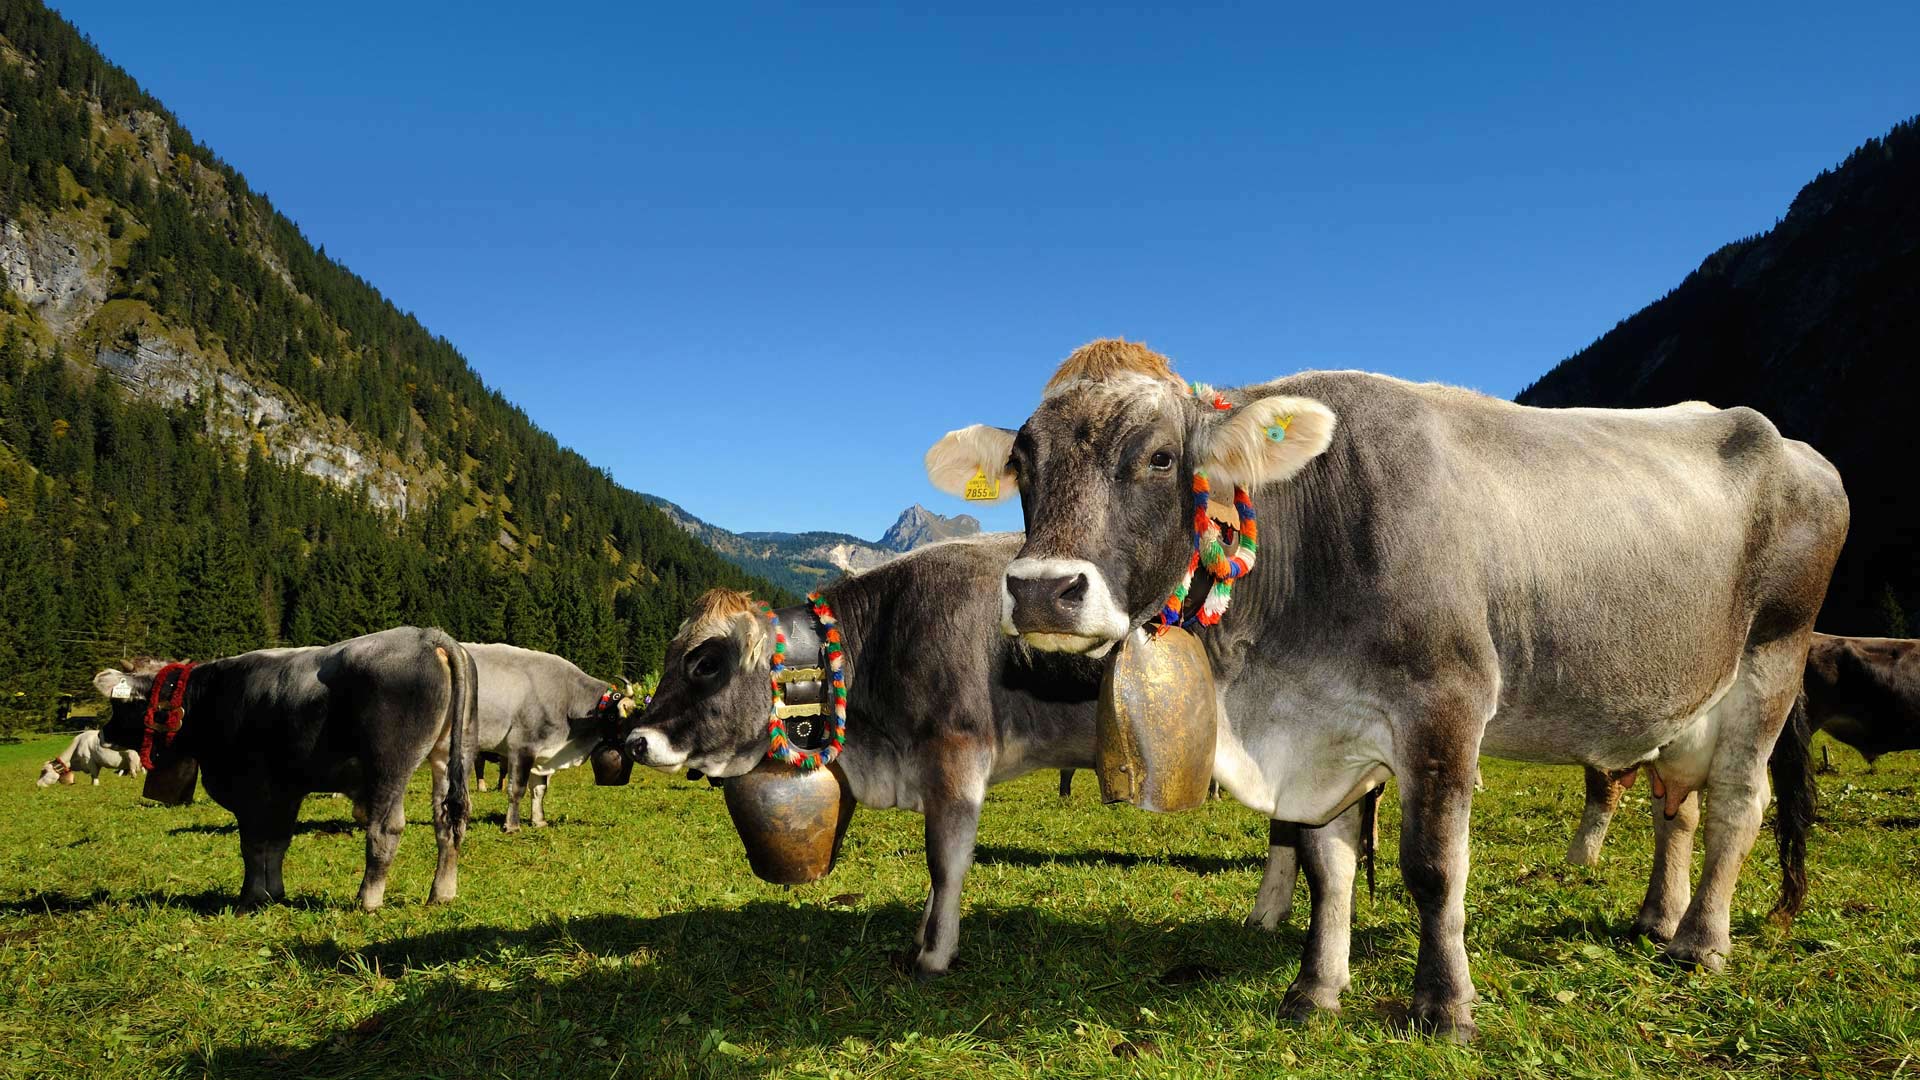 Cows decorated for the Almabtrieb in Tannheimer Tal, a valley in Tyrol, Austria - Hans Lippert/Alamy)